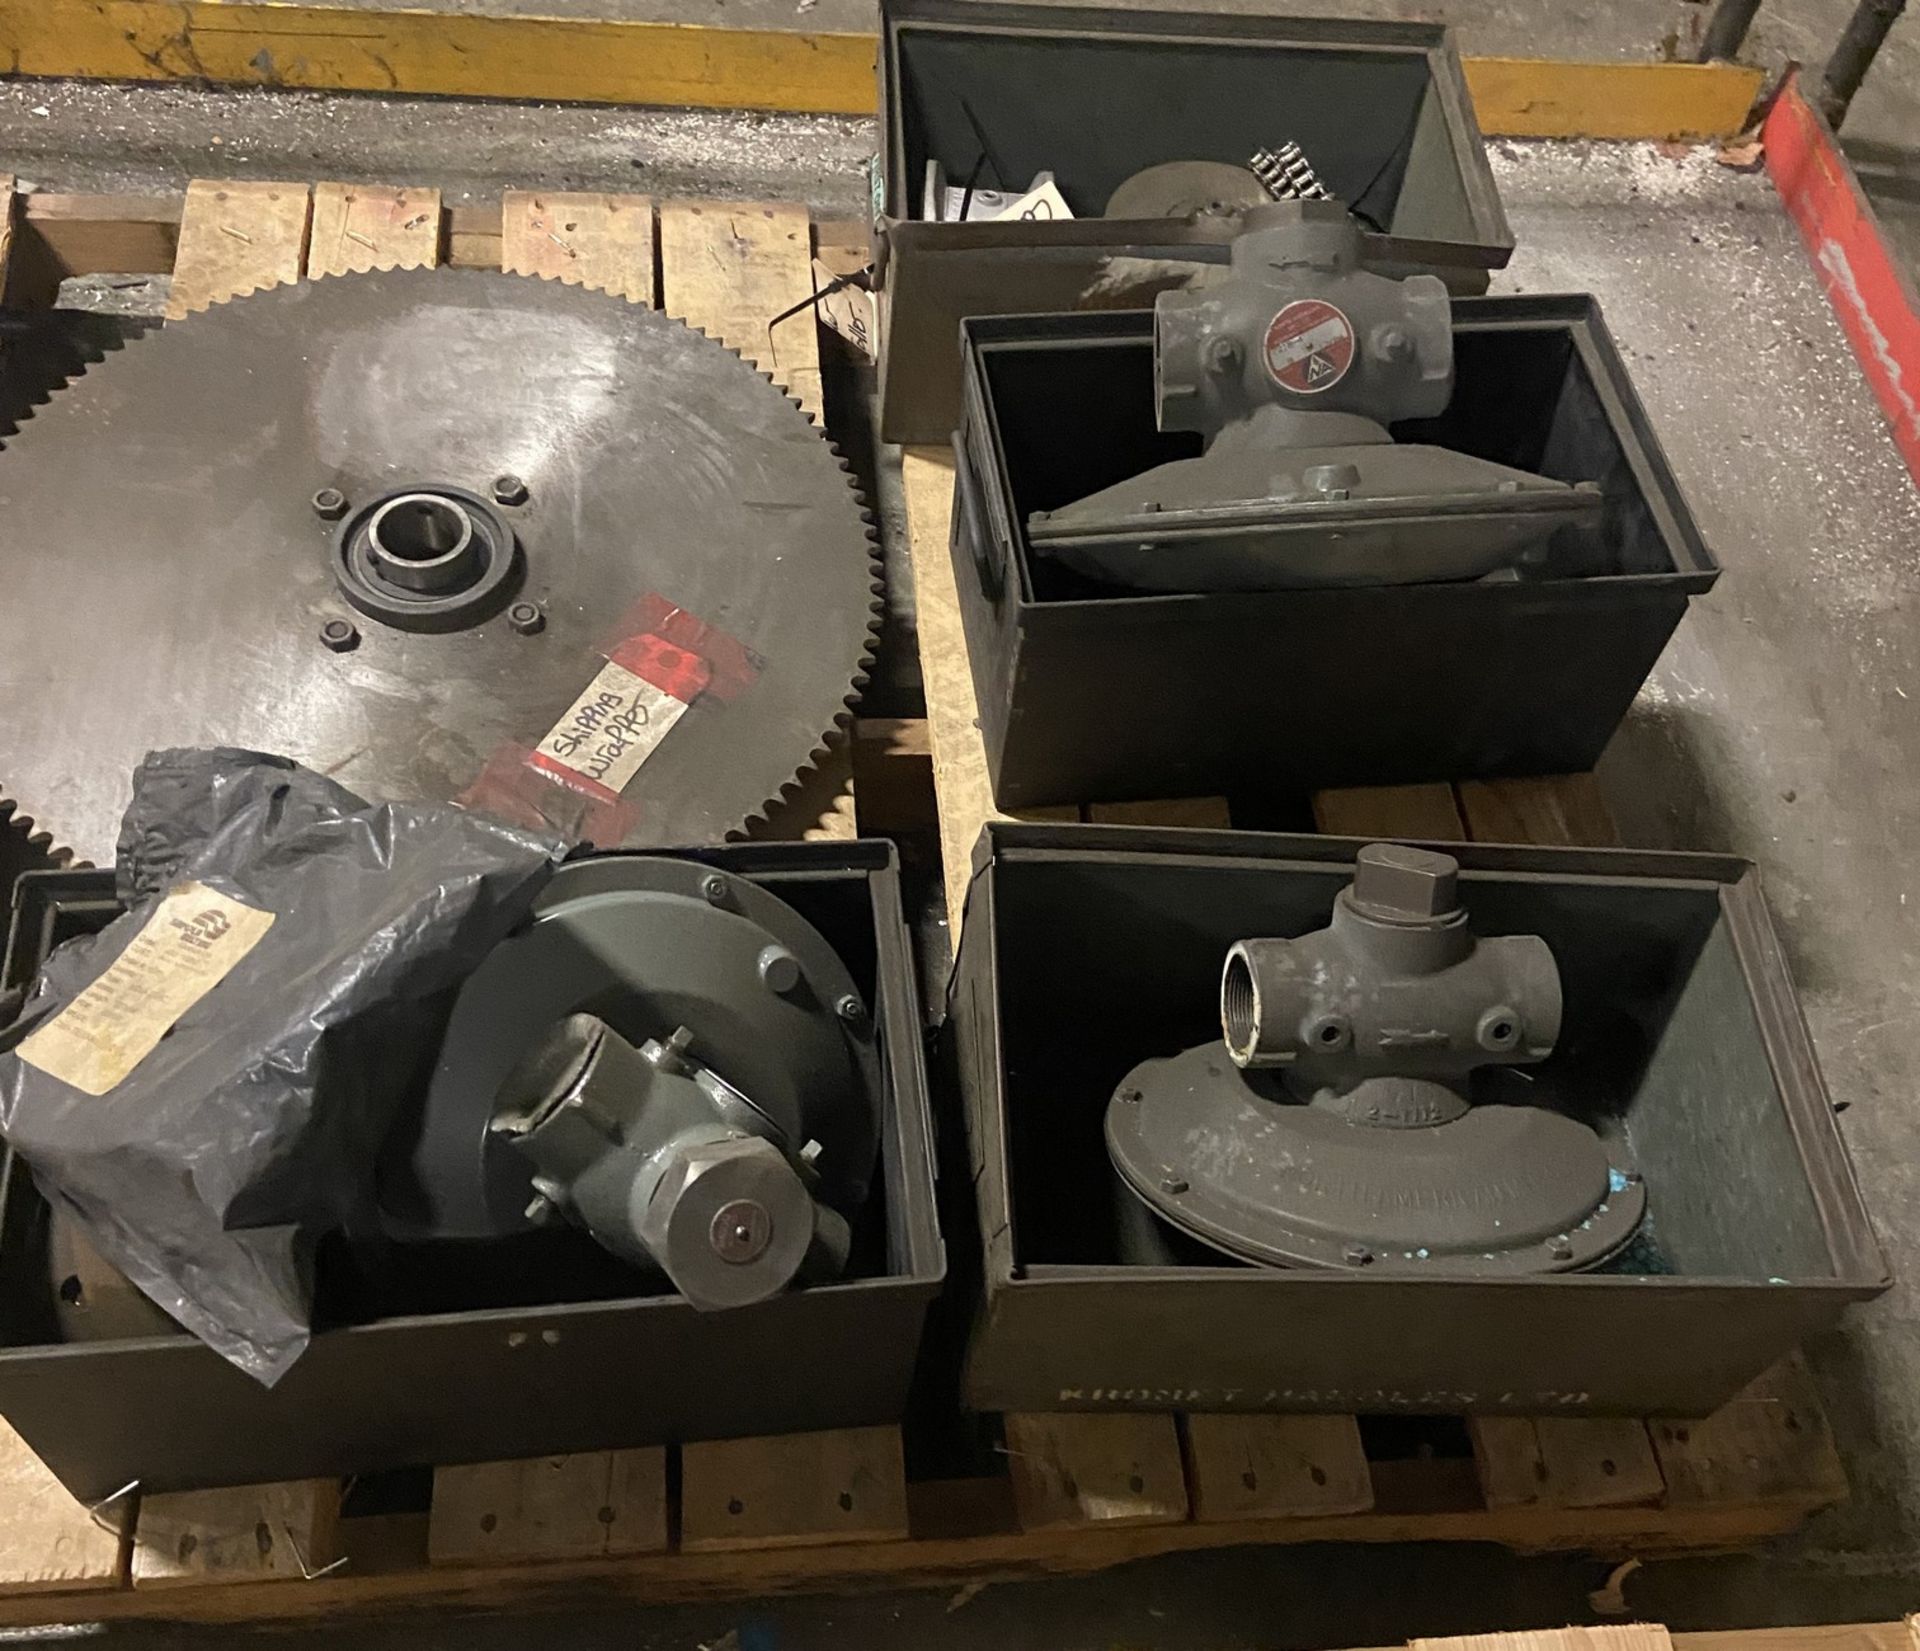 LOT (7) PALLETS OF ASSORTED TOOLING, ELECTRIC MOTORS, WELDING WIRE, FILTERS, CONTROL VALVES, CHAIN - Image 7 of 9